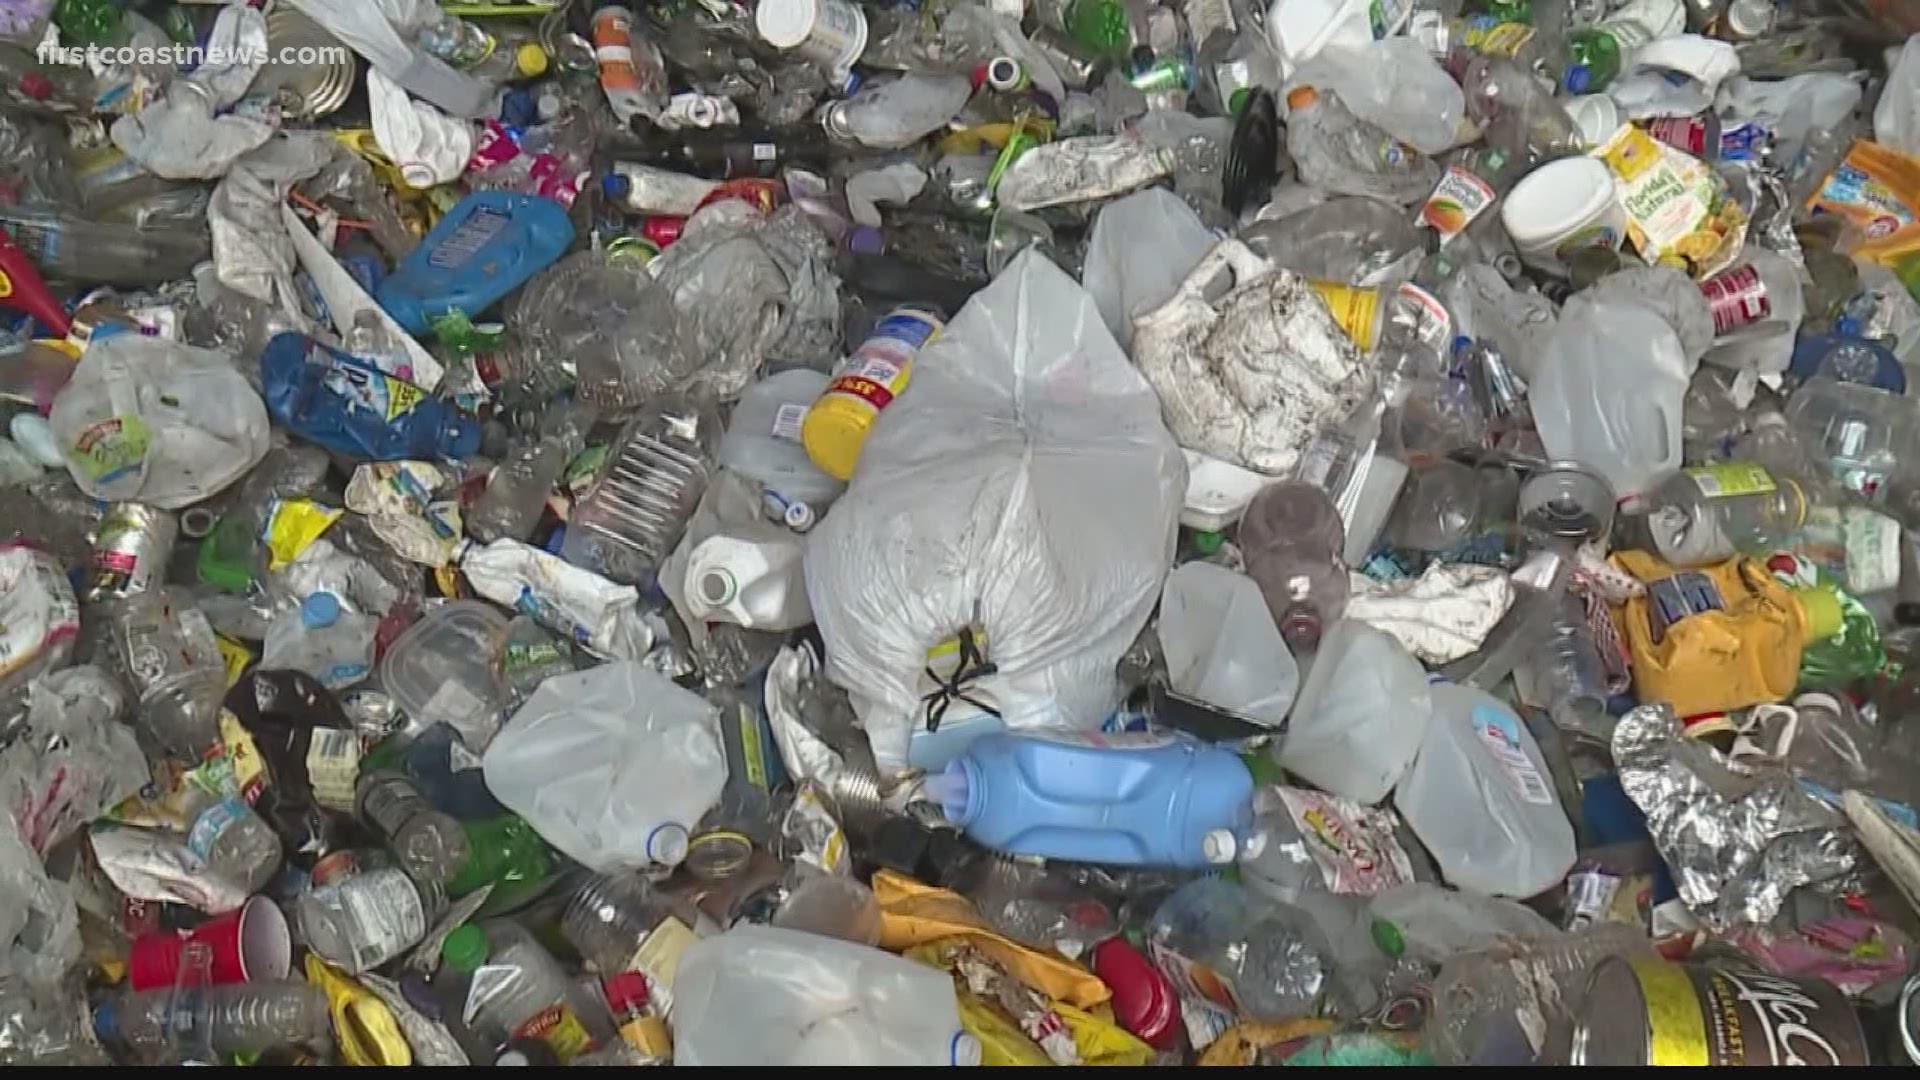 The glass in your recycling bin may not be getting recycled, officials say